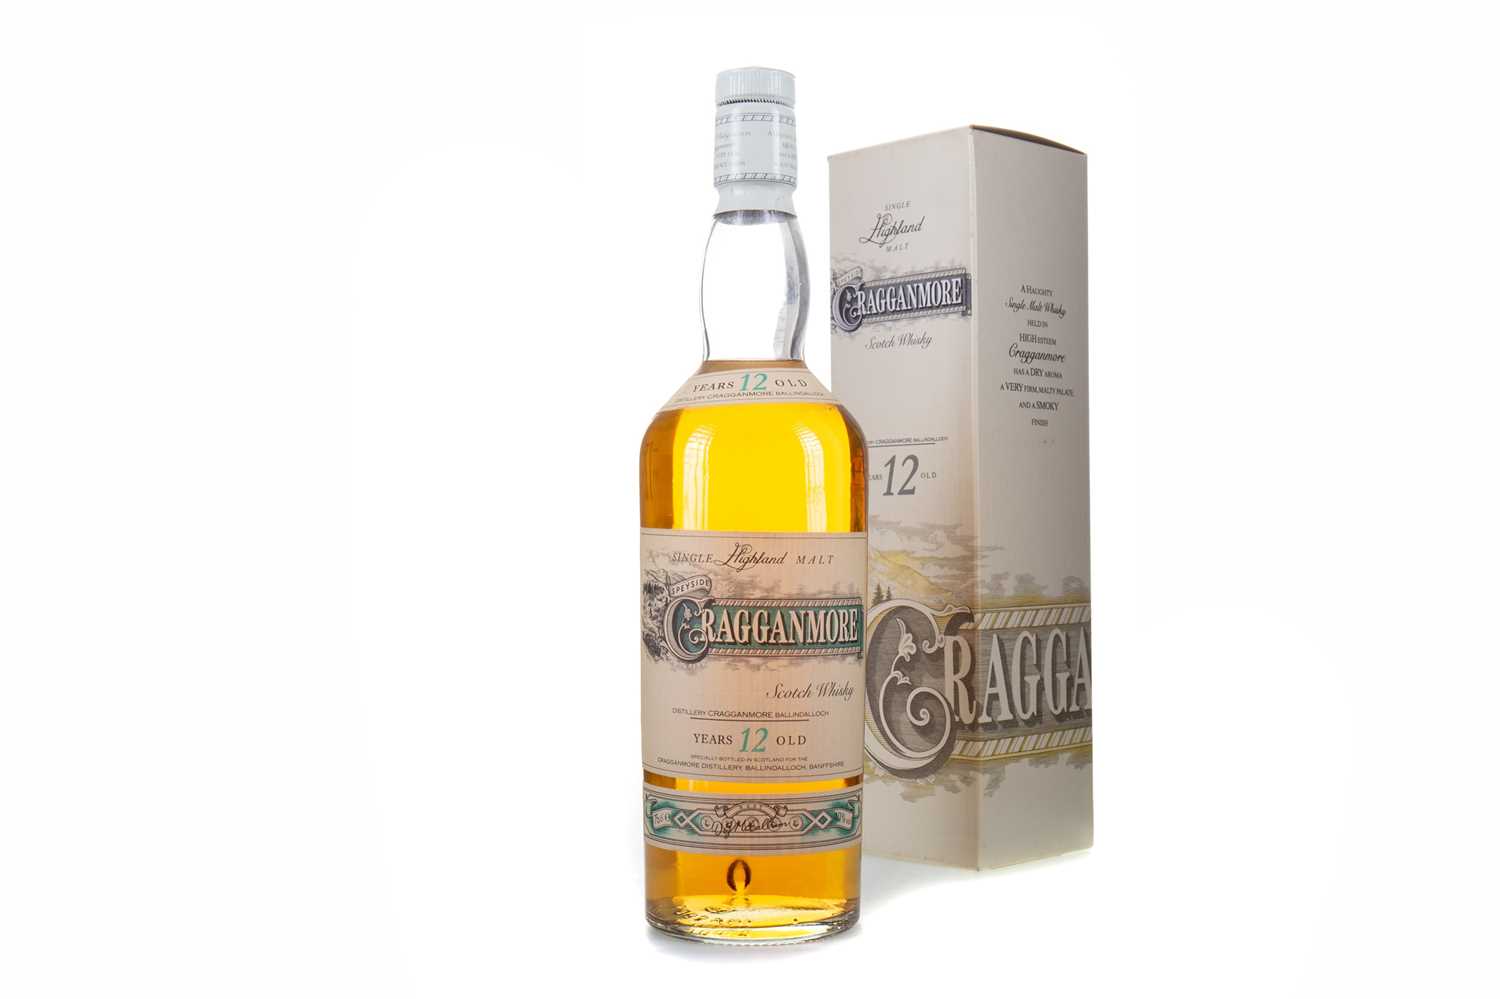 Lot 29 - CRAGGANMORE 12 YEAR OLD 75CL